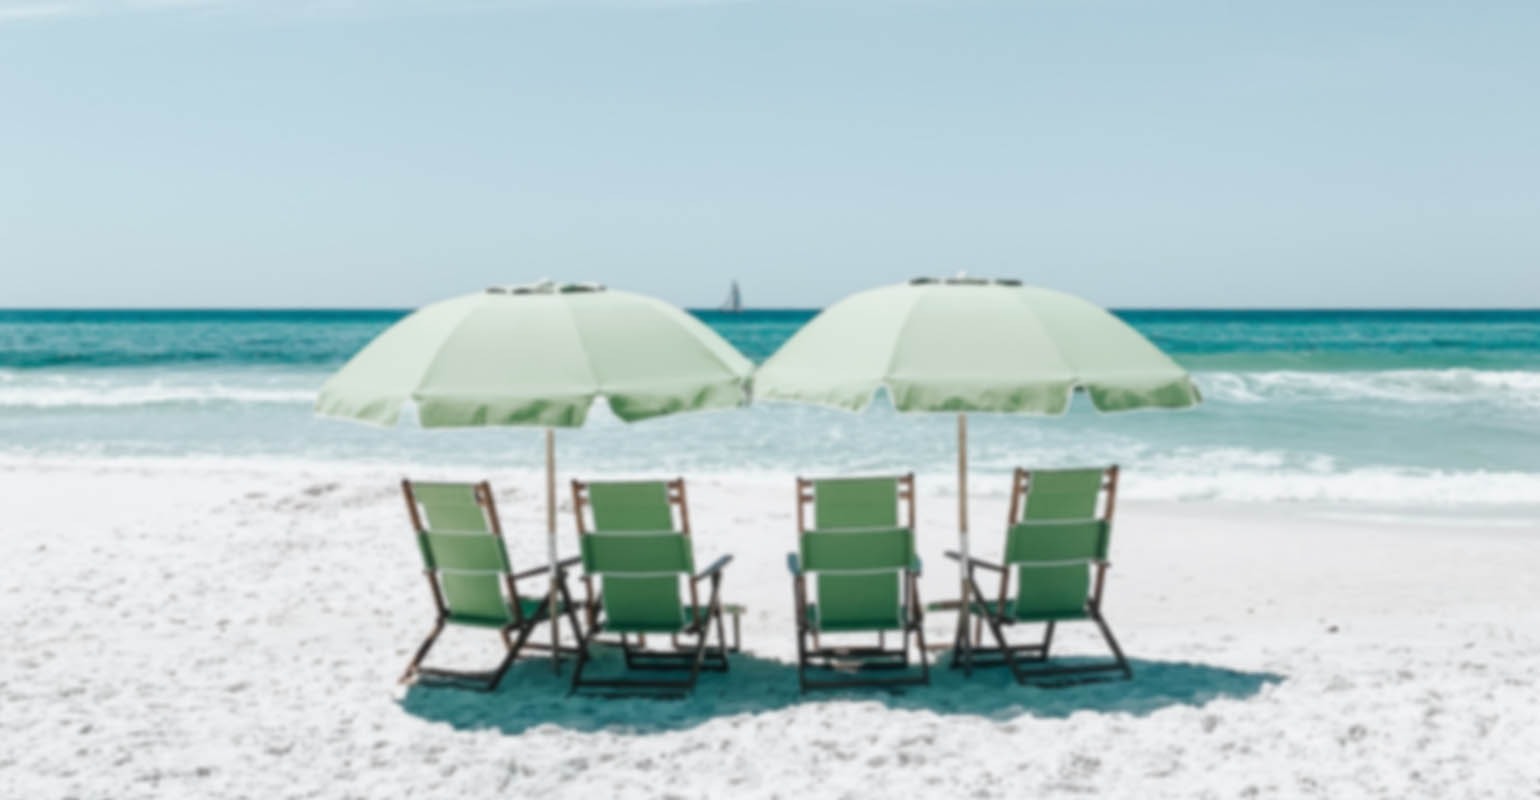 A blurry photo of green chairs under umbrellas on beach sand